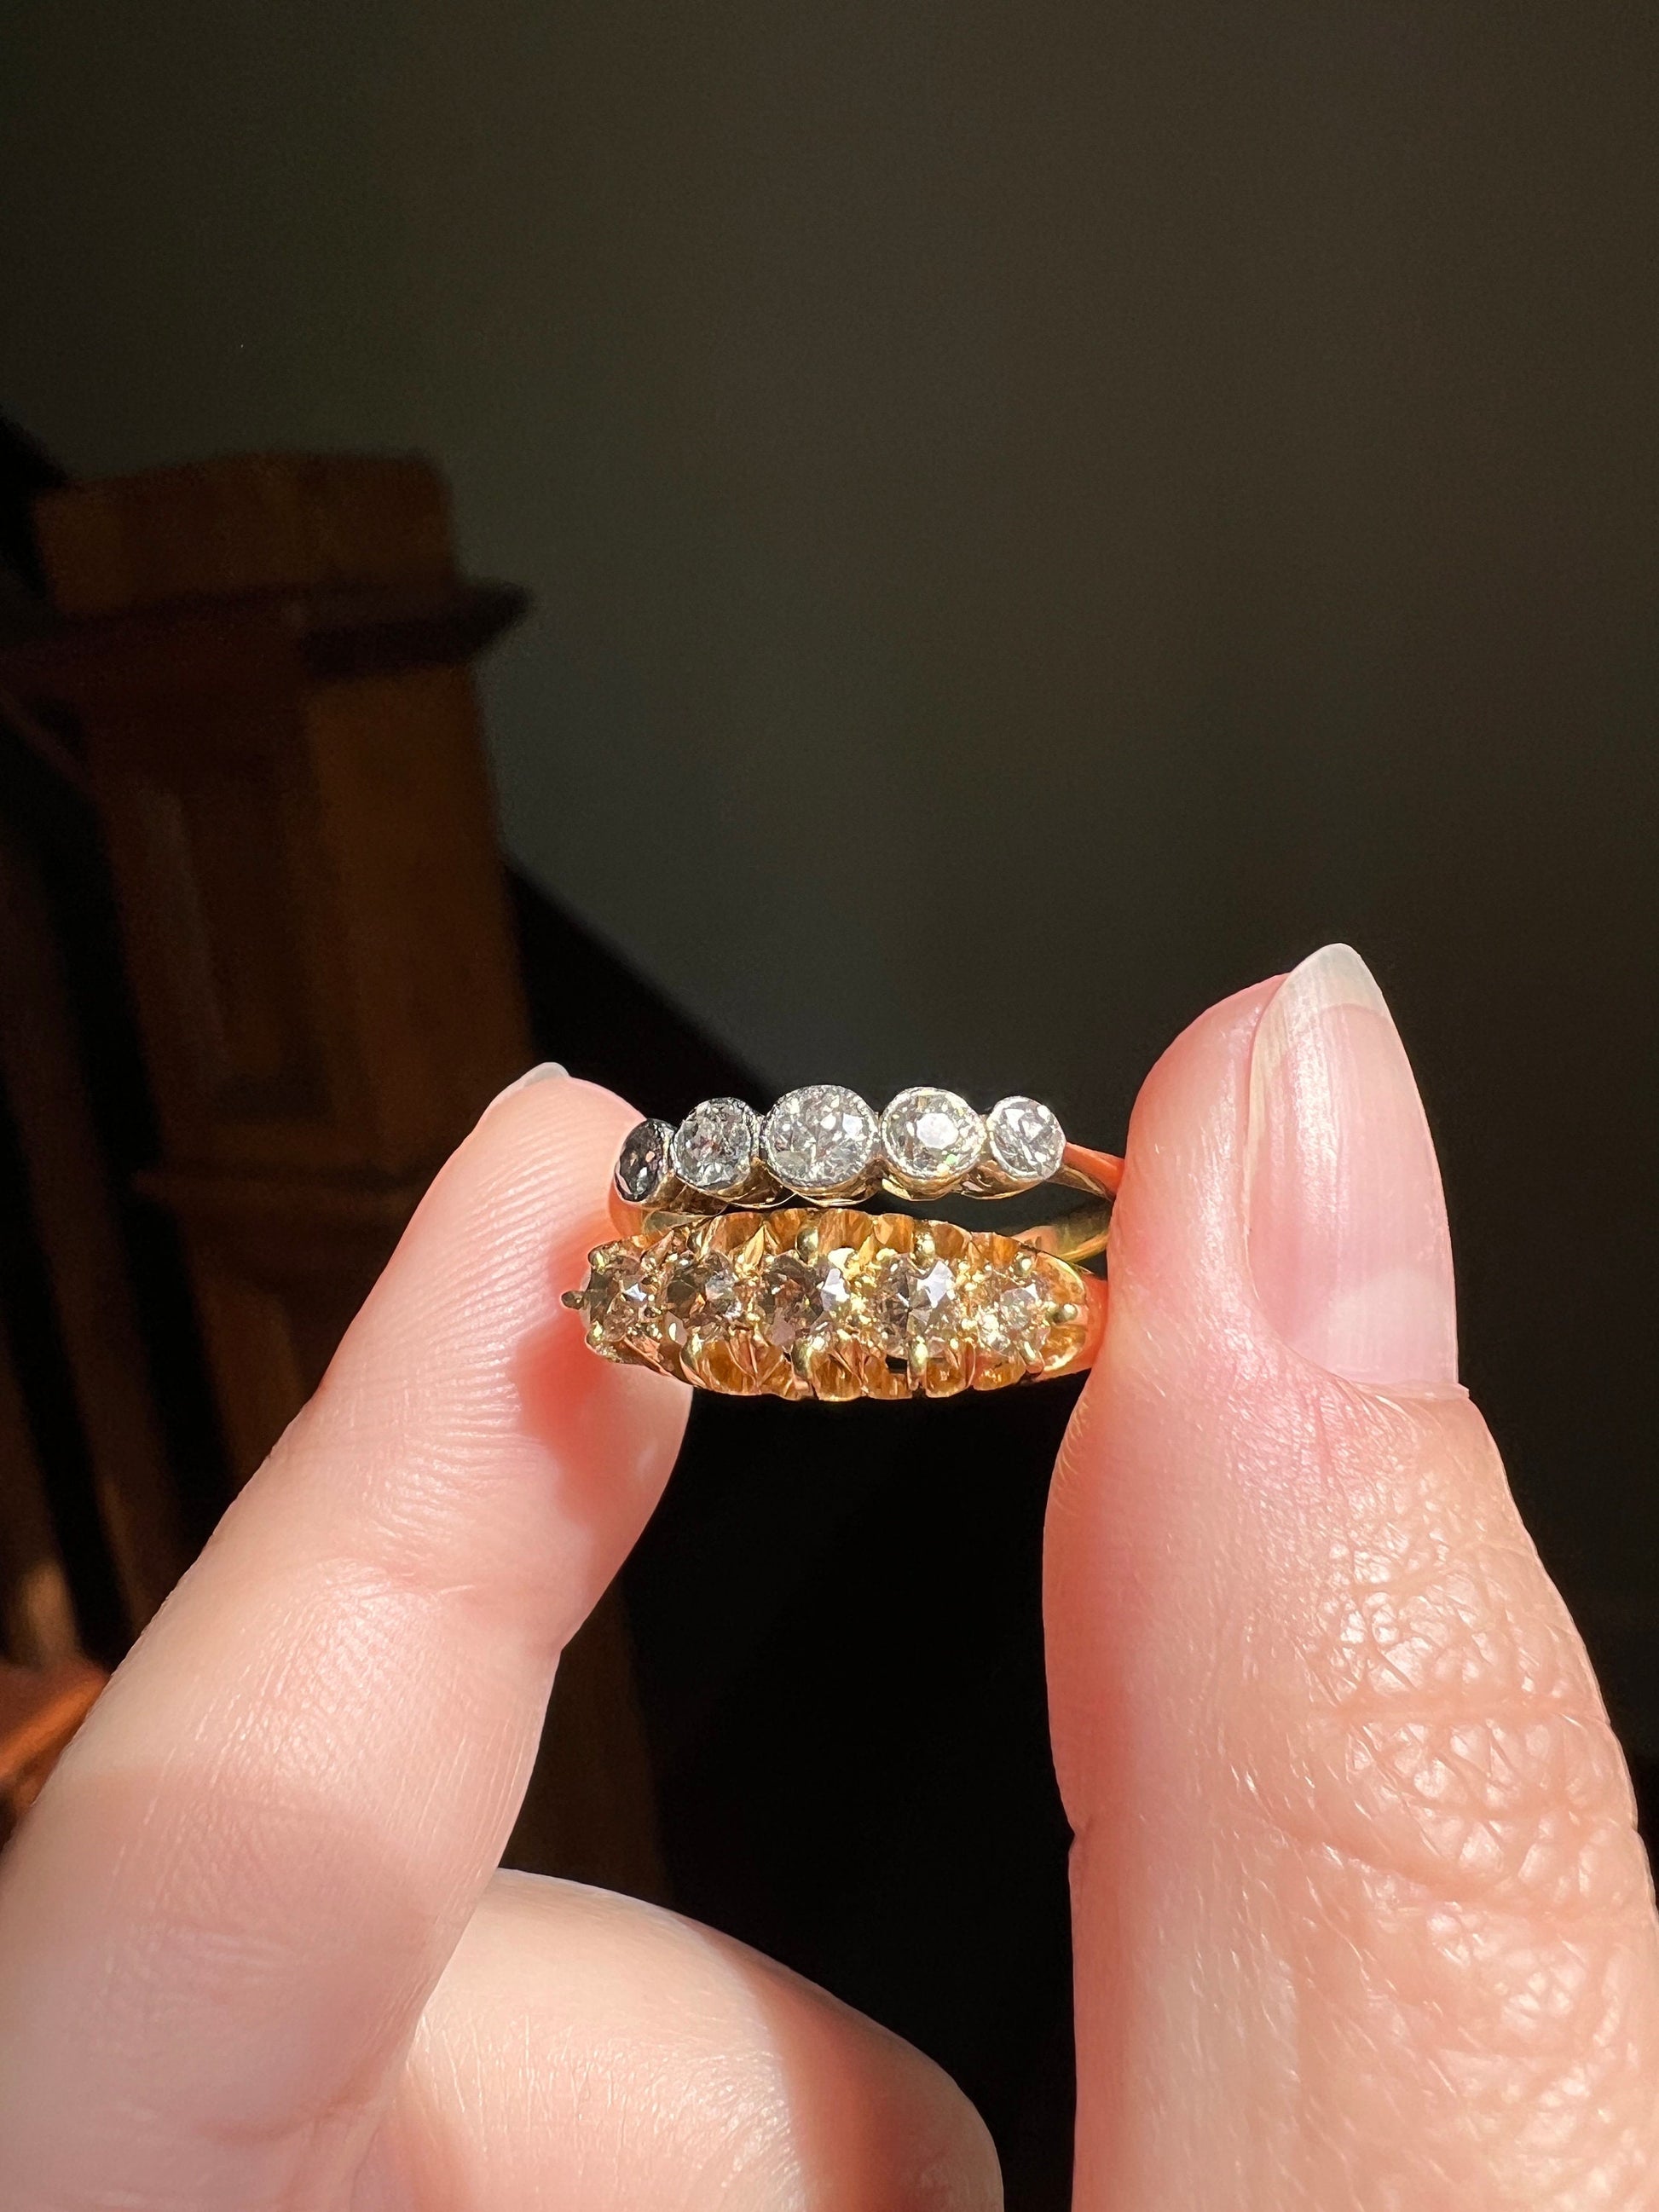 CHAMPAGNE Old Mine Cut Diamond ANTiQUE Band Ring .5ctw Five Stone Buttercup 18k GOLD Victorian Stacker Romantic Gift Pale Brown Yellow OMC